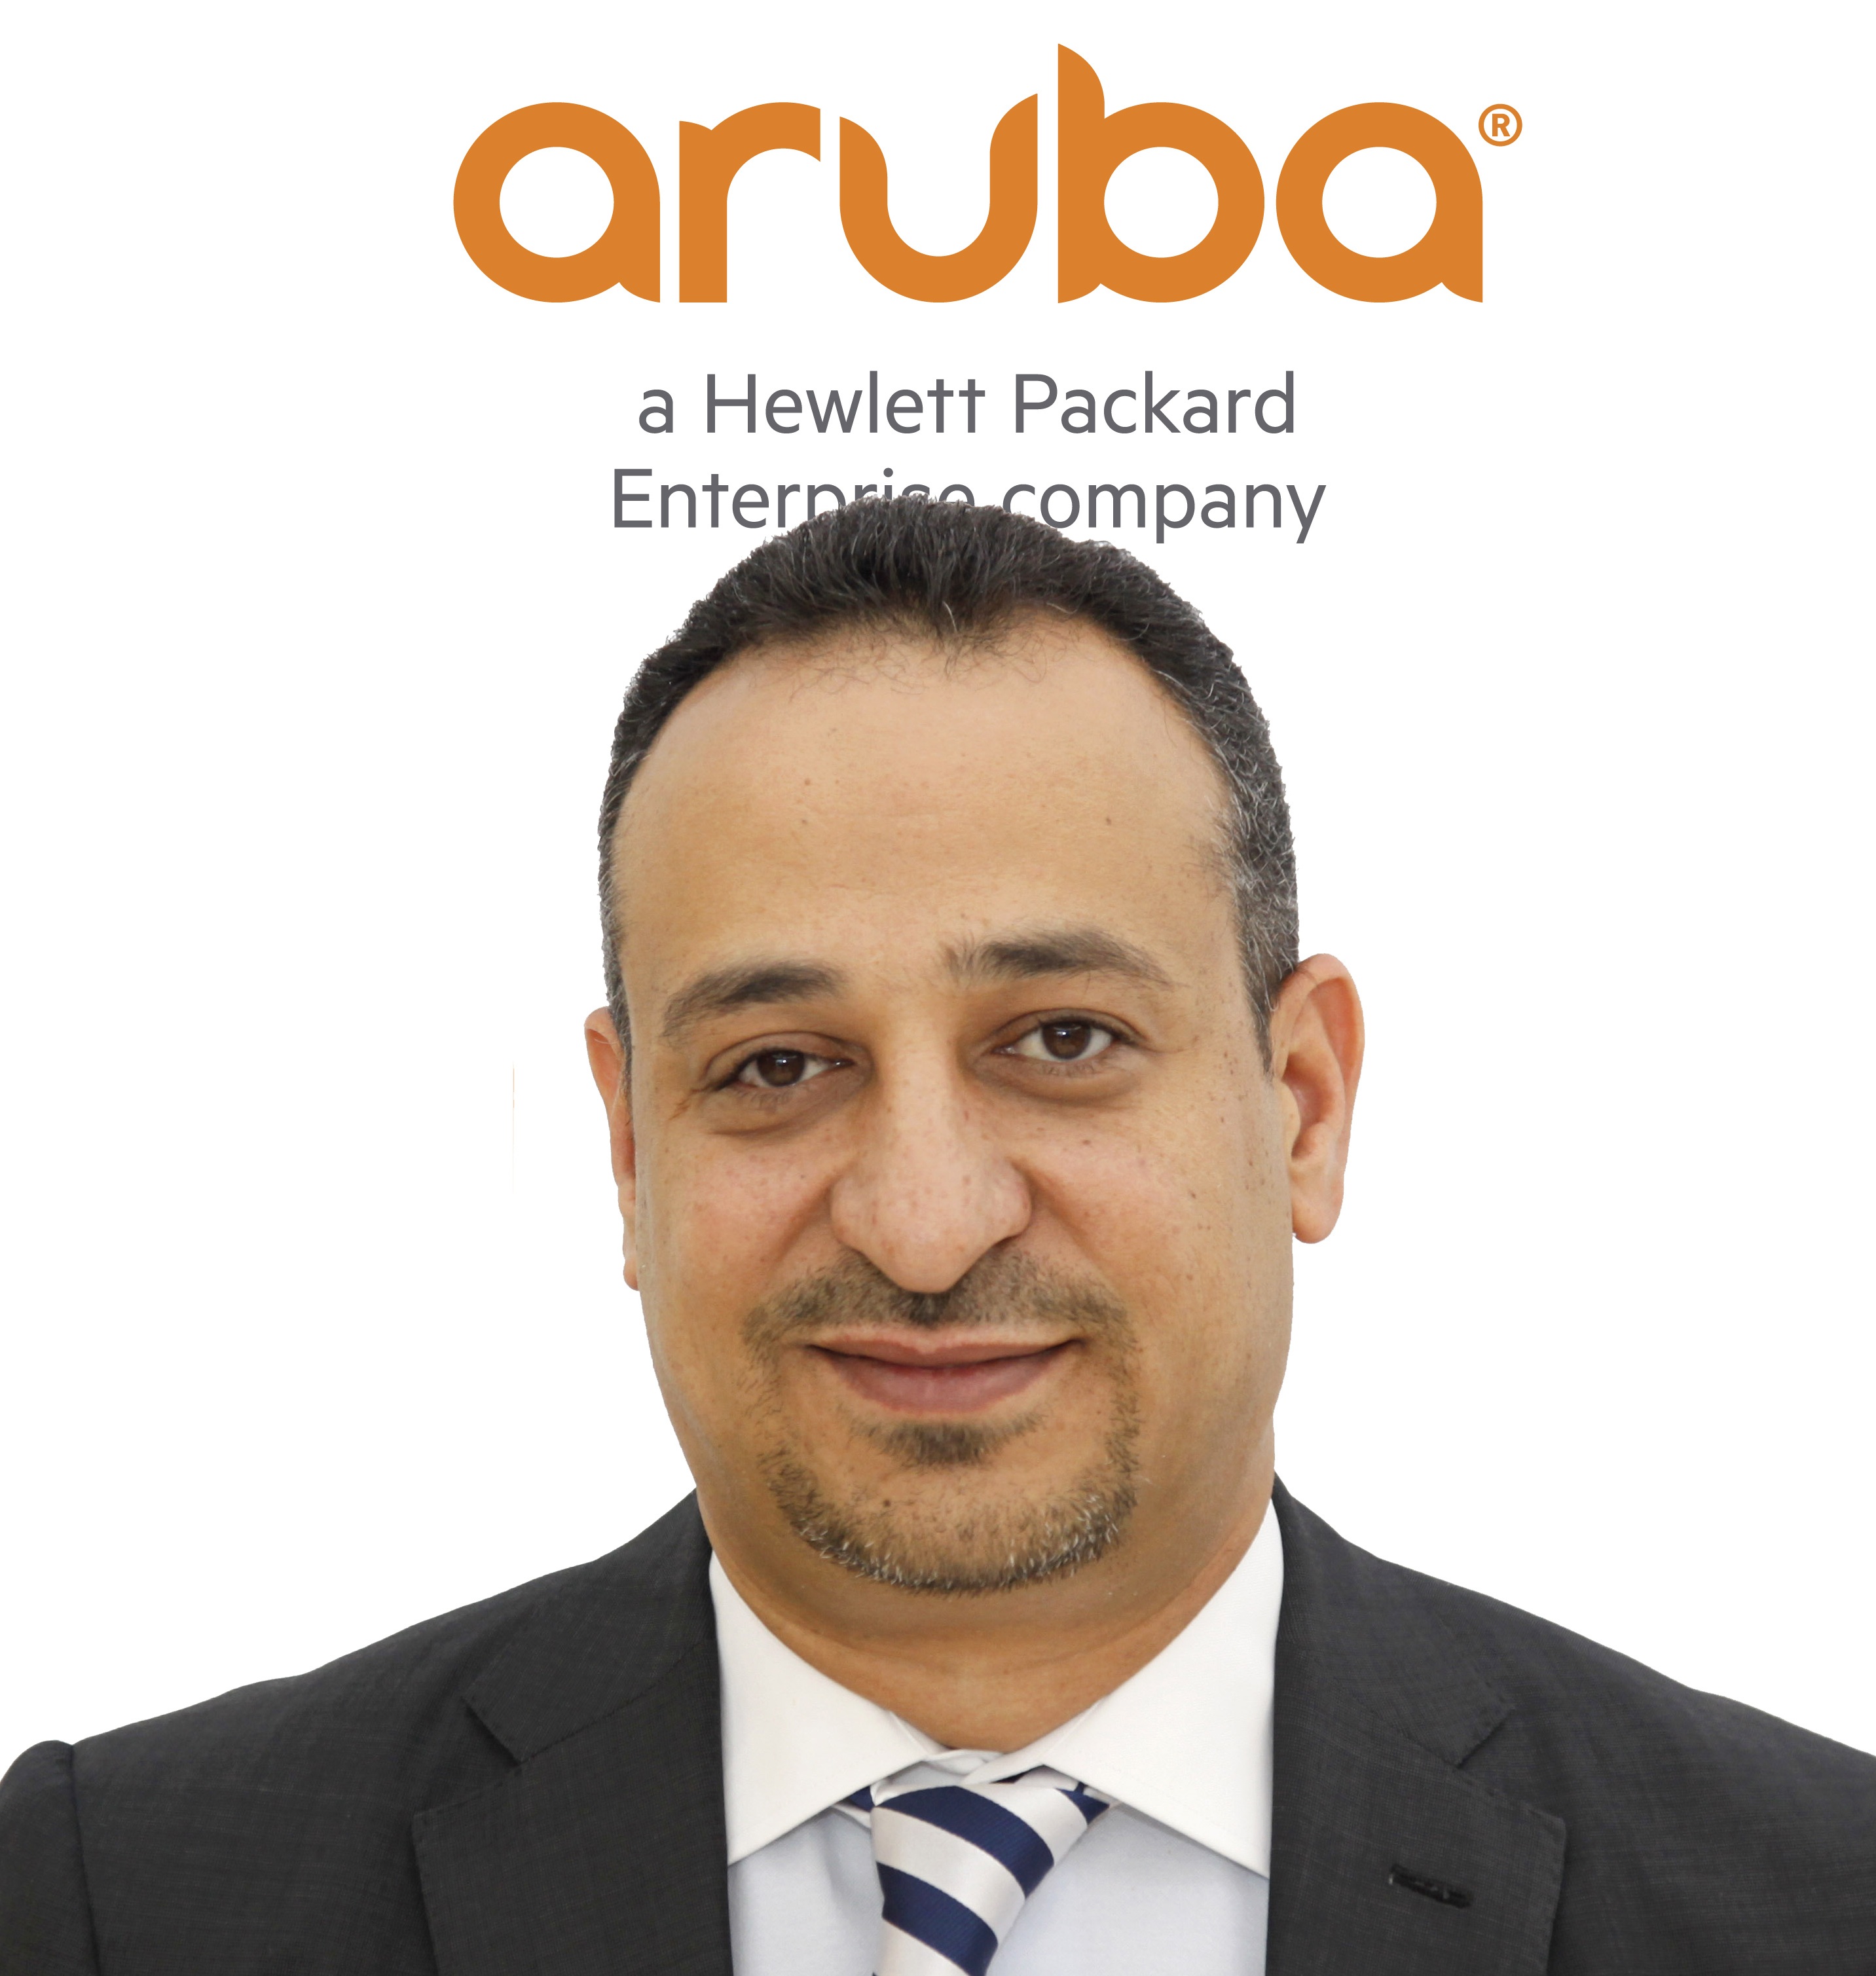 Aruba appoints Gamal Emara as Country Sales Manager for UAE